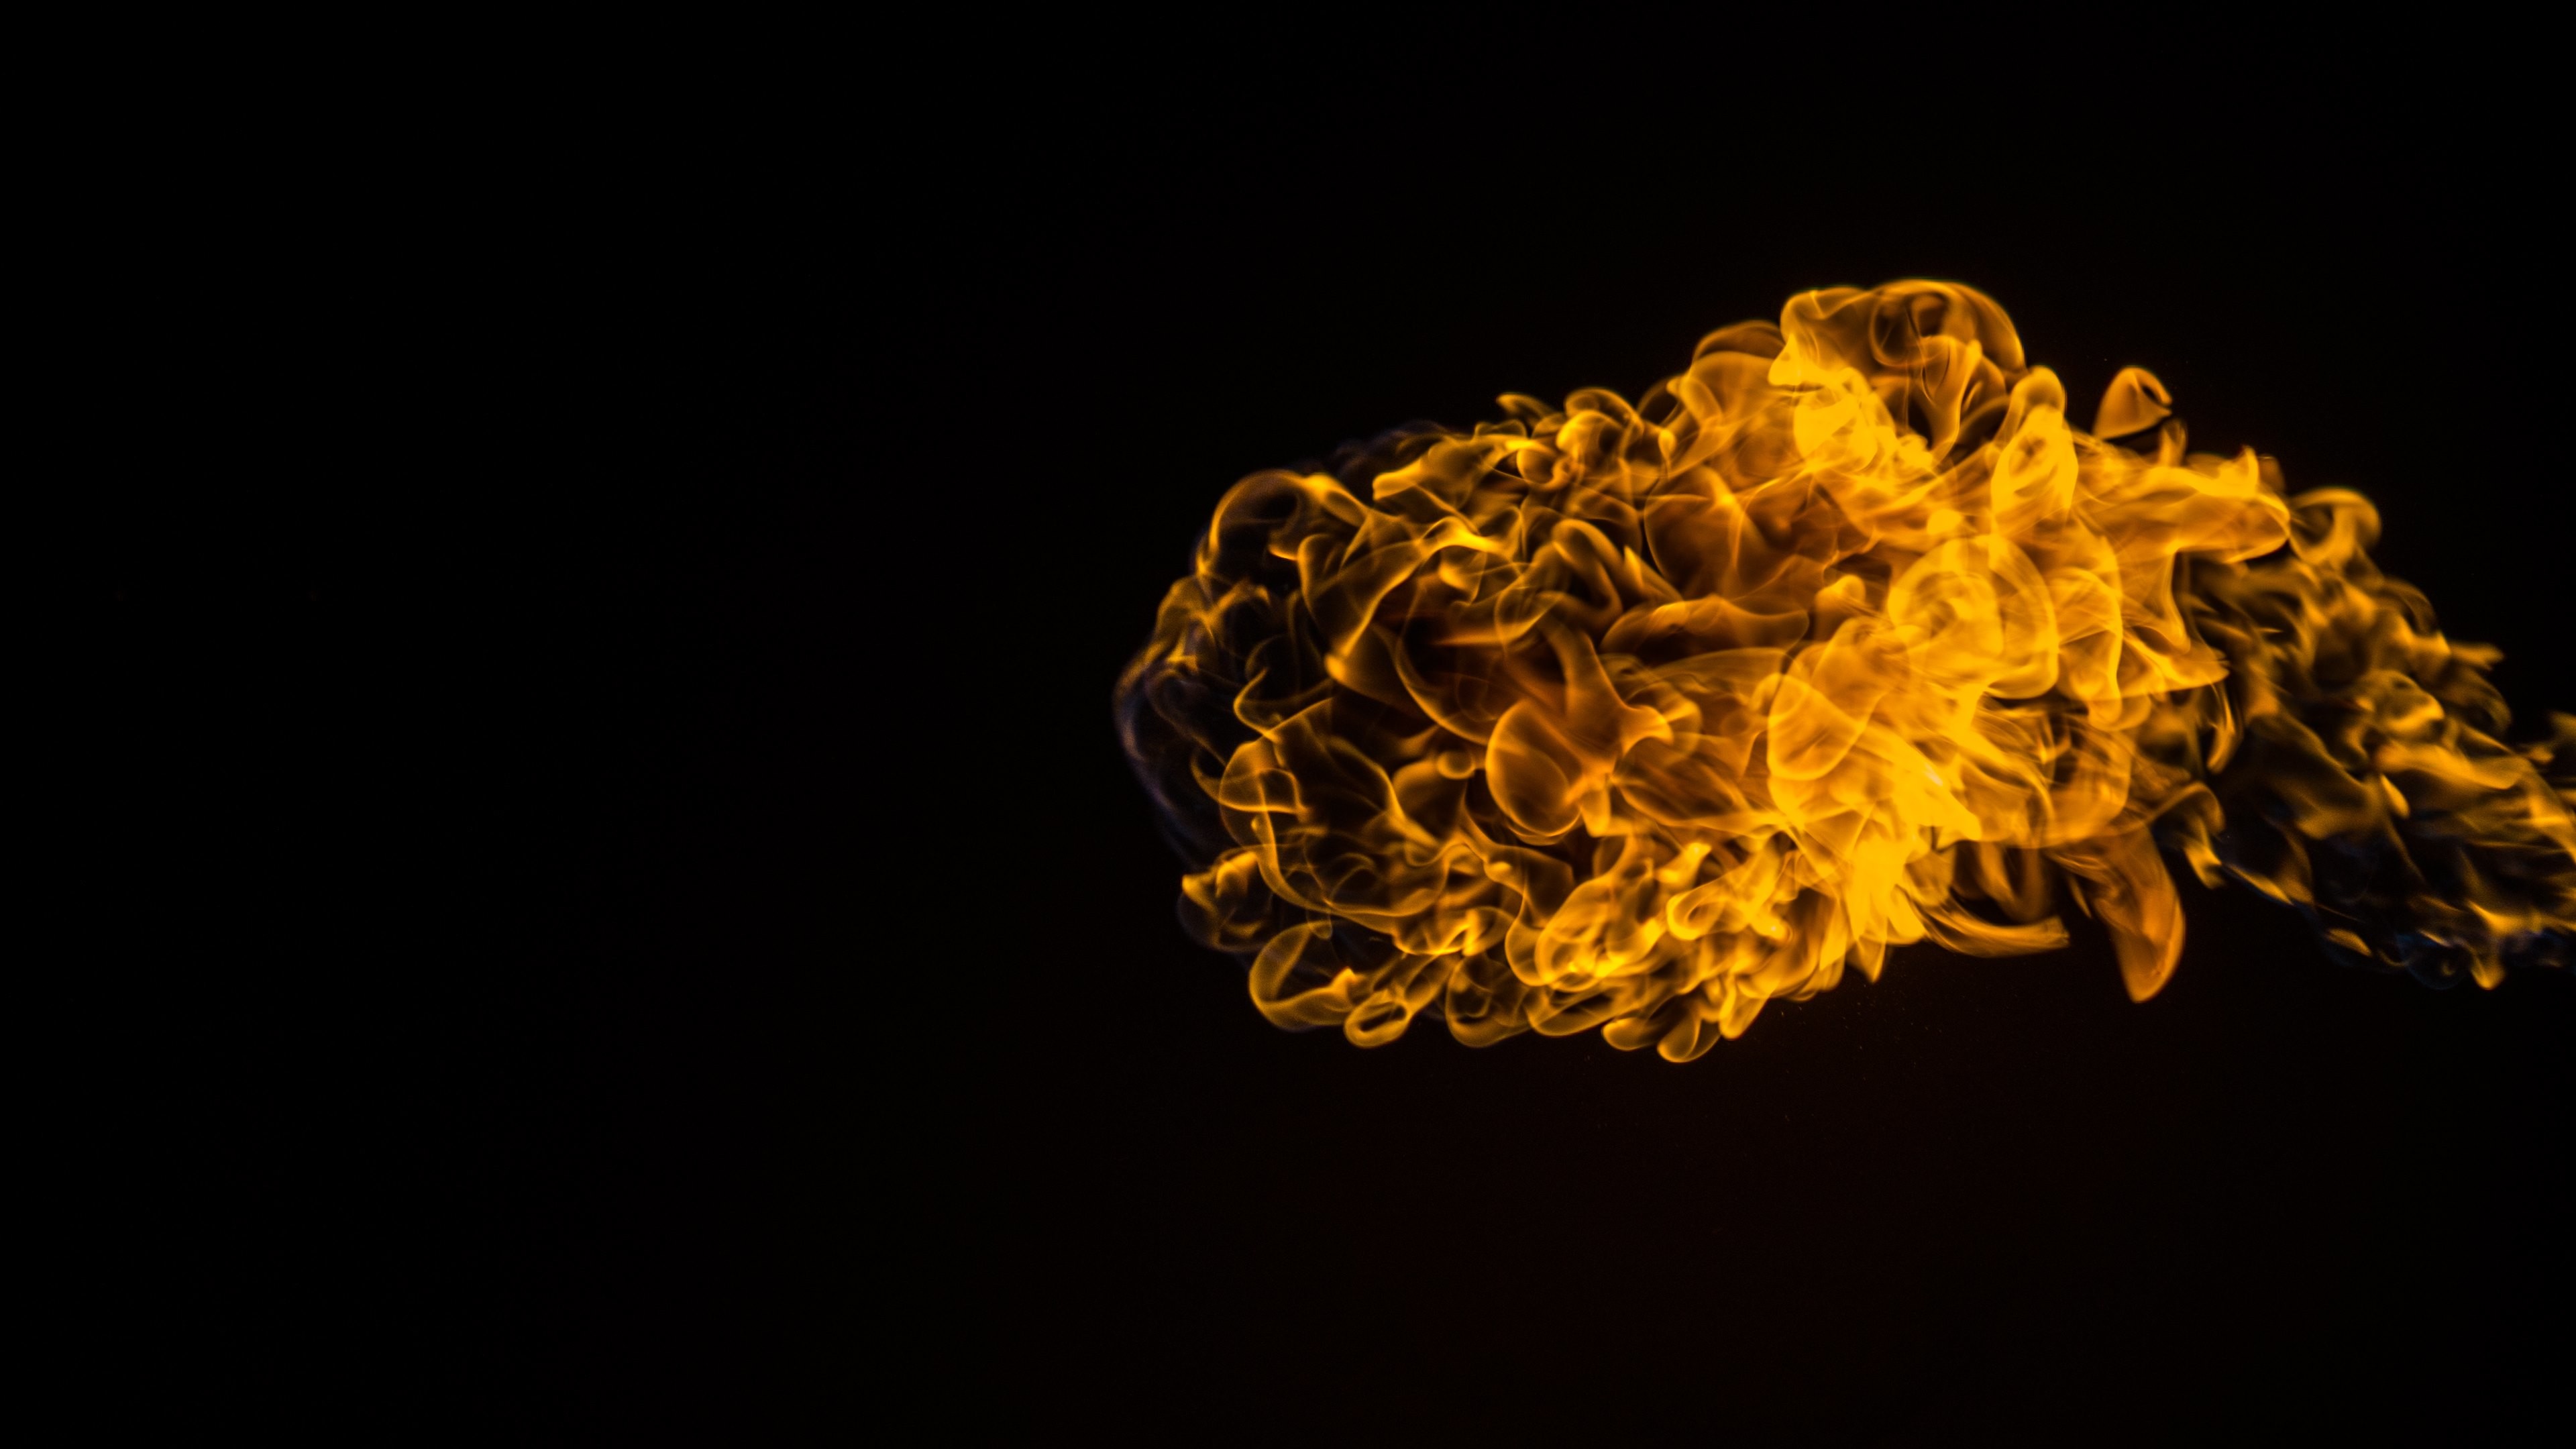 3840x2160 Cool Flames Effect - Image #1884 - Licence: Free for Personal Use -  Wallpaper